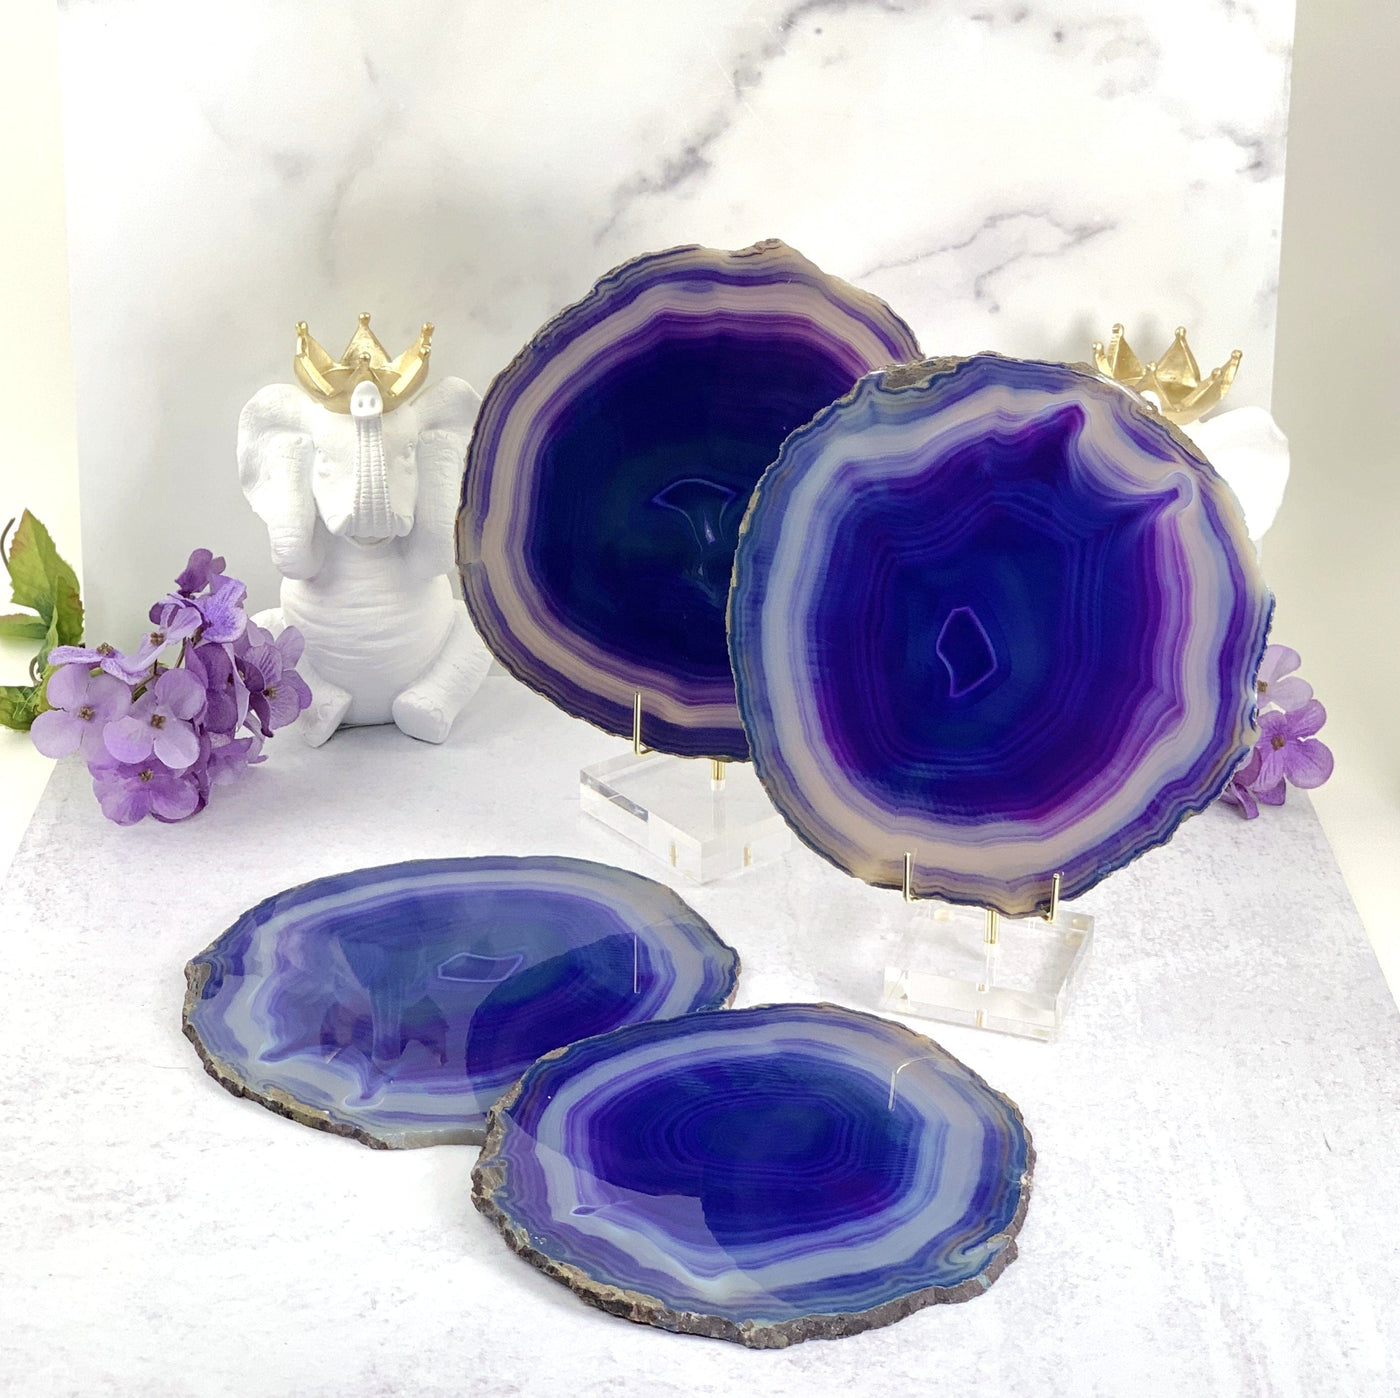 2 large Purple Agate Slice on acrylic stand 2 agate slices laid out on white background